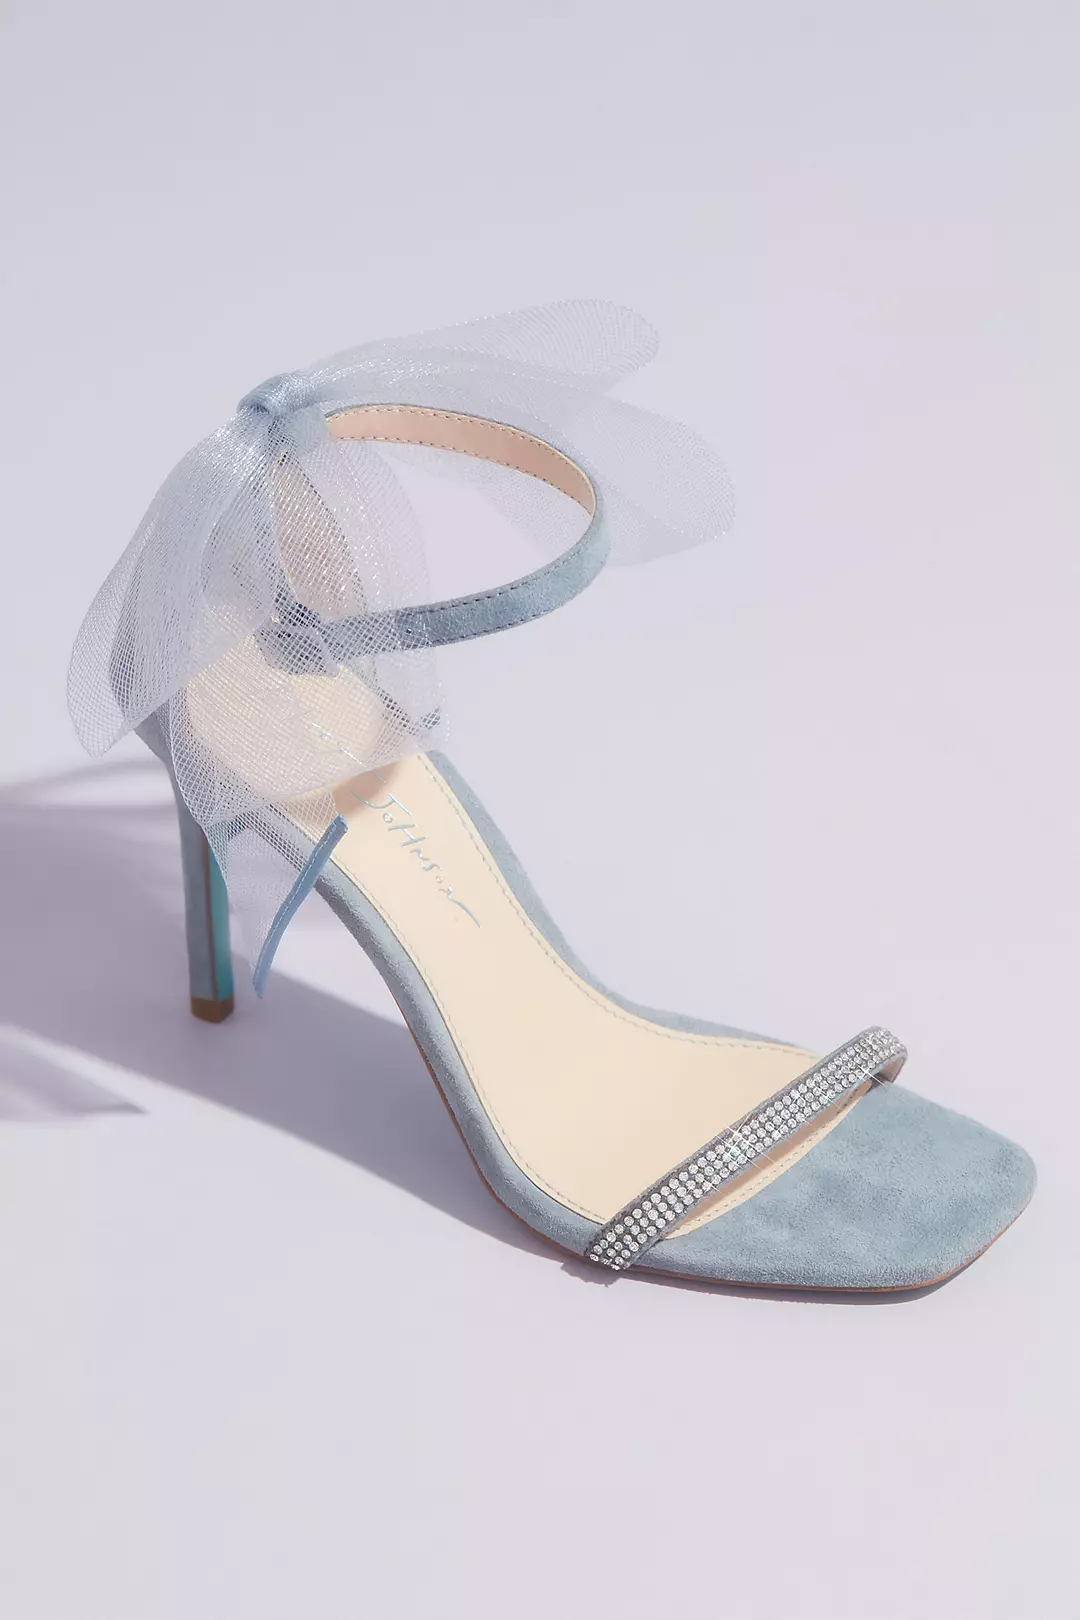 Tulle Bow High Heel Ankle Strap Sandals Image